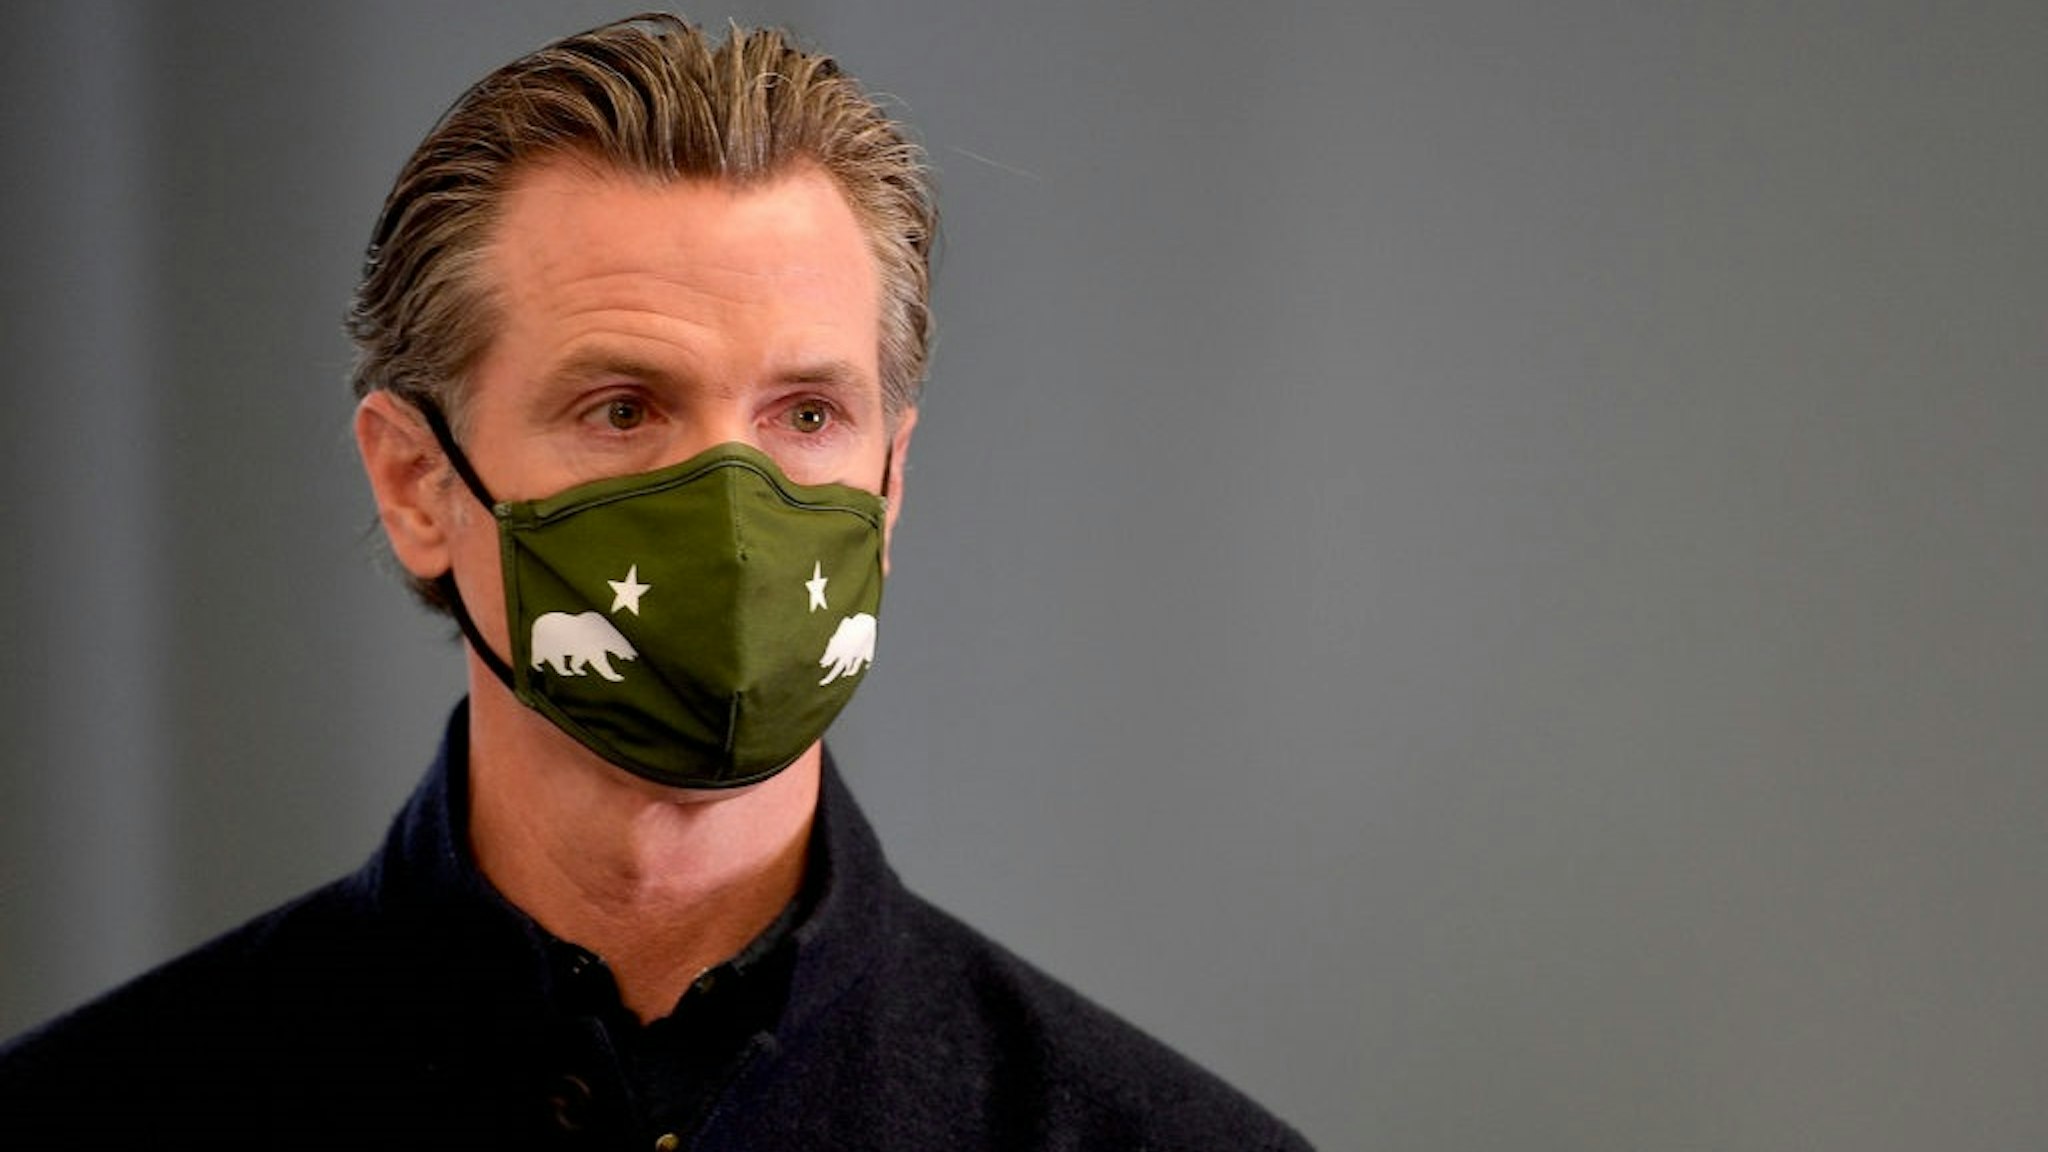 SANTA ANA, CA - MARCH 25: California Governor Gavin Newsom announces new eligibility during a press conference at a COVID-19 vaccination site at AltaMed in Santa Ana, CA, on Thursday, March 25, 2020.